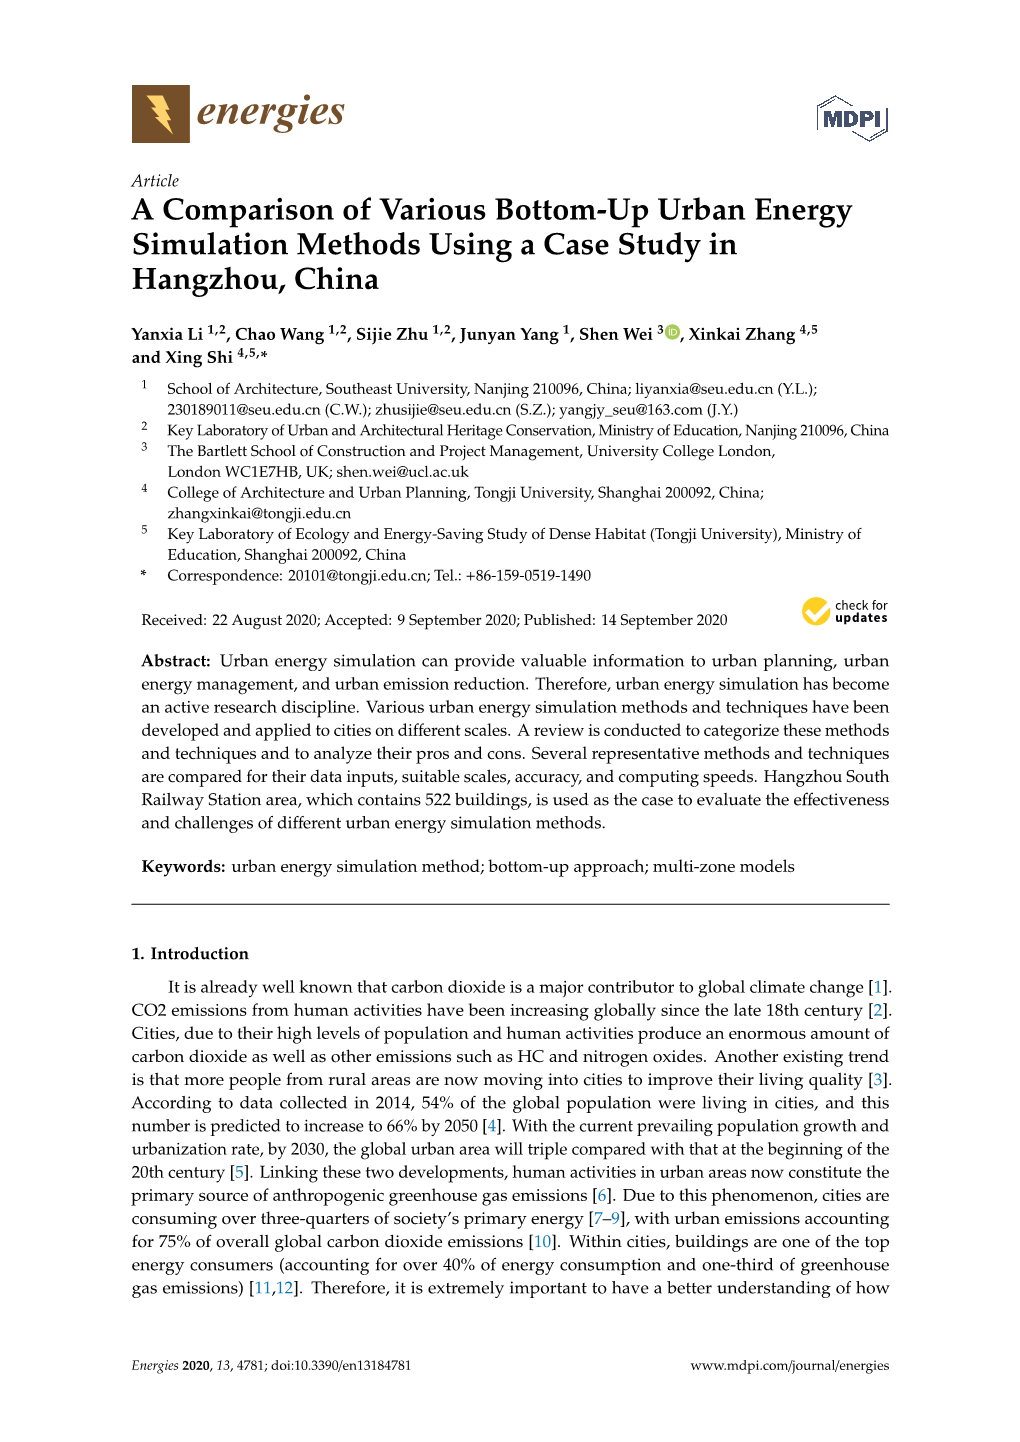 A Comparison of Various Bottom-Up Urban Energy Simulation Methods Using a Case Study in Hangzhou, China